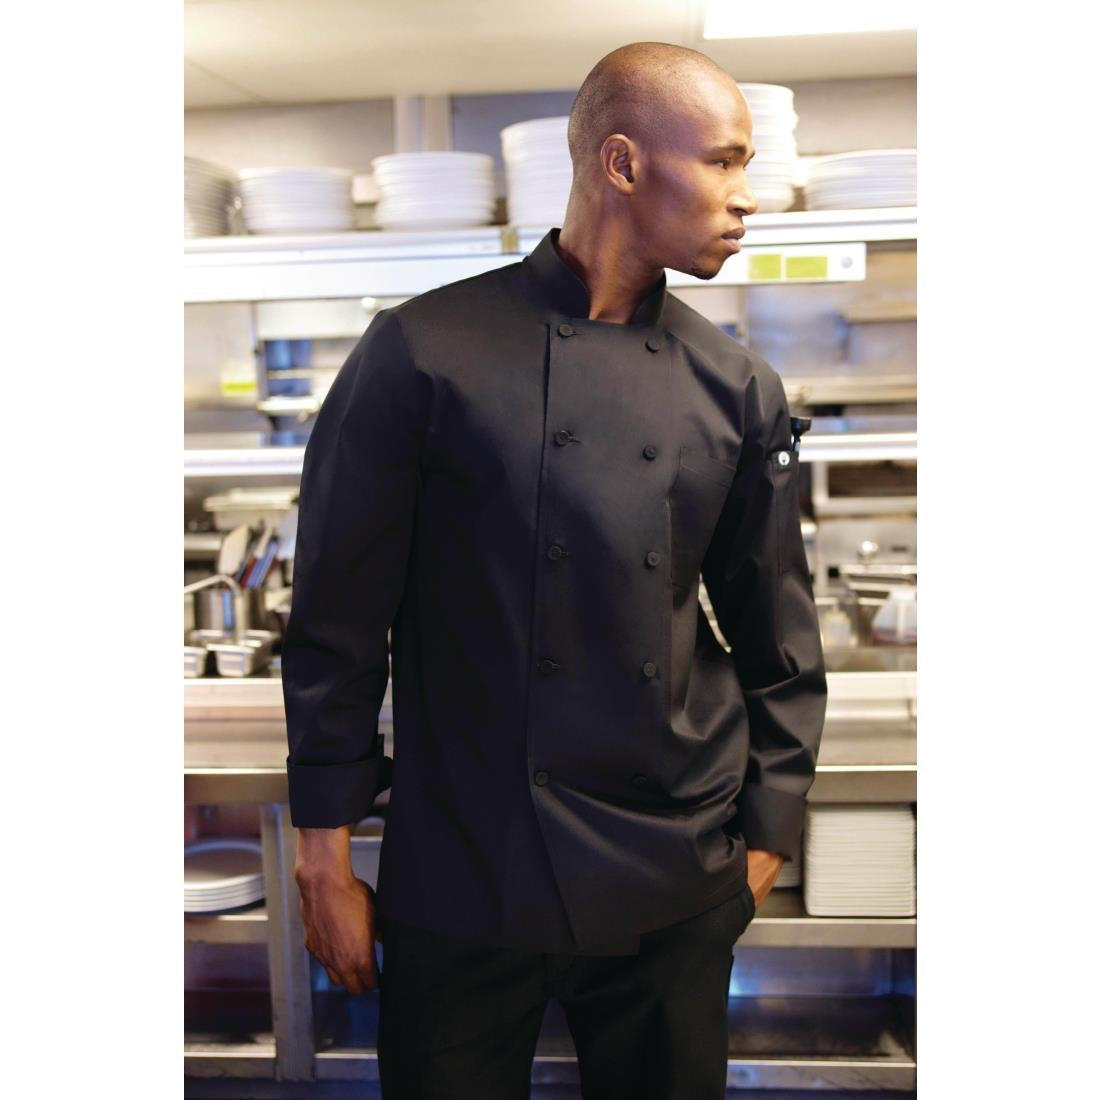 B648-S Chef Works Calgary Cool Vent Unisex Chefs Jacket Black S